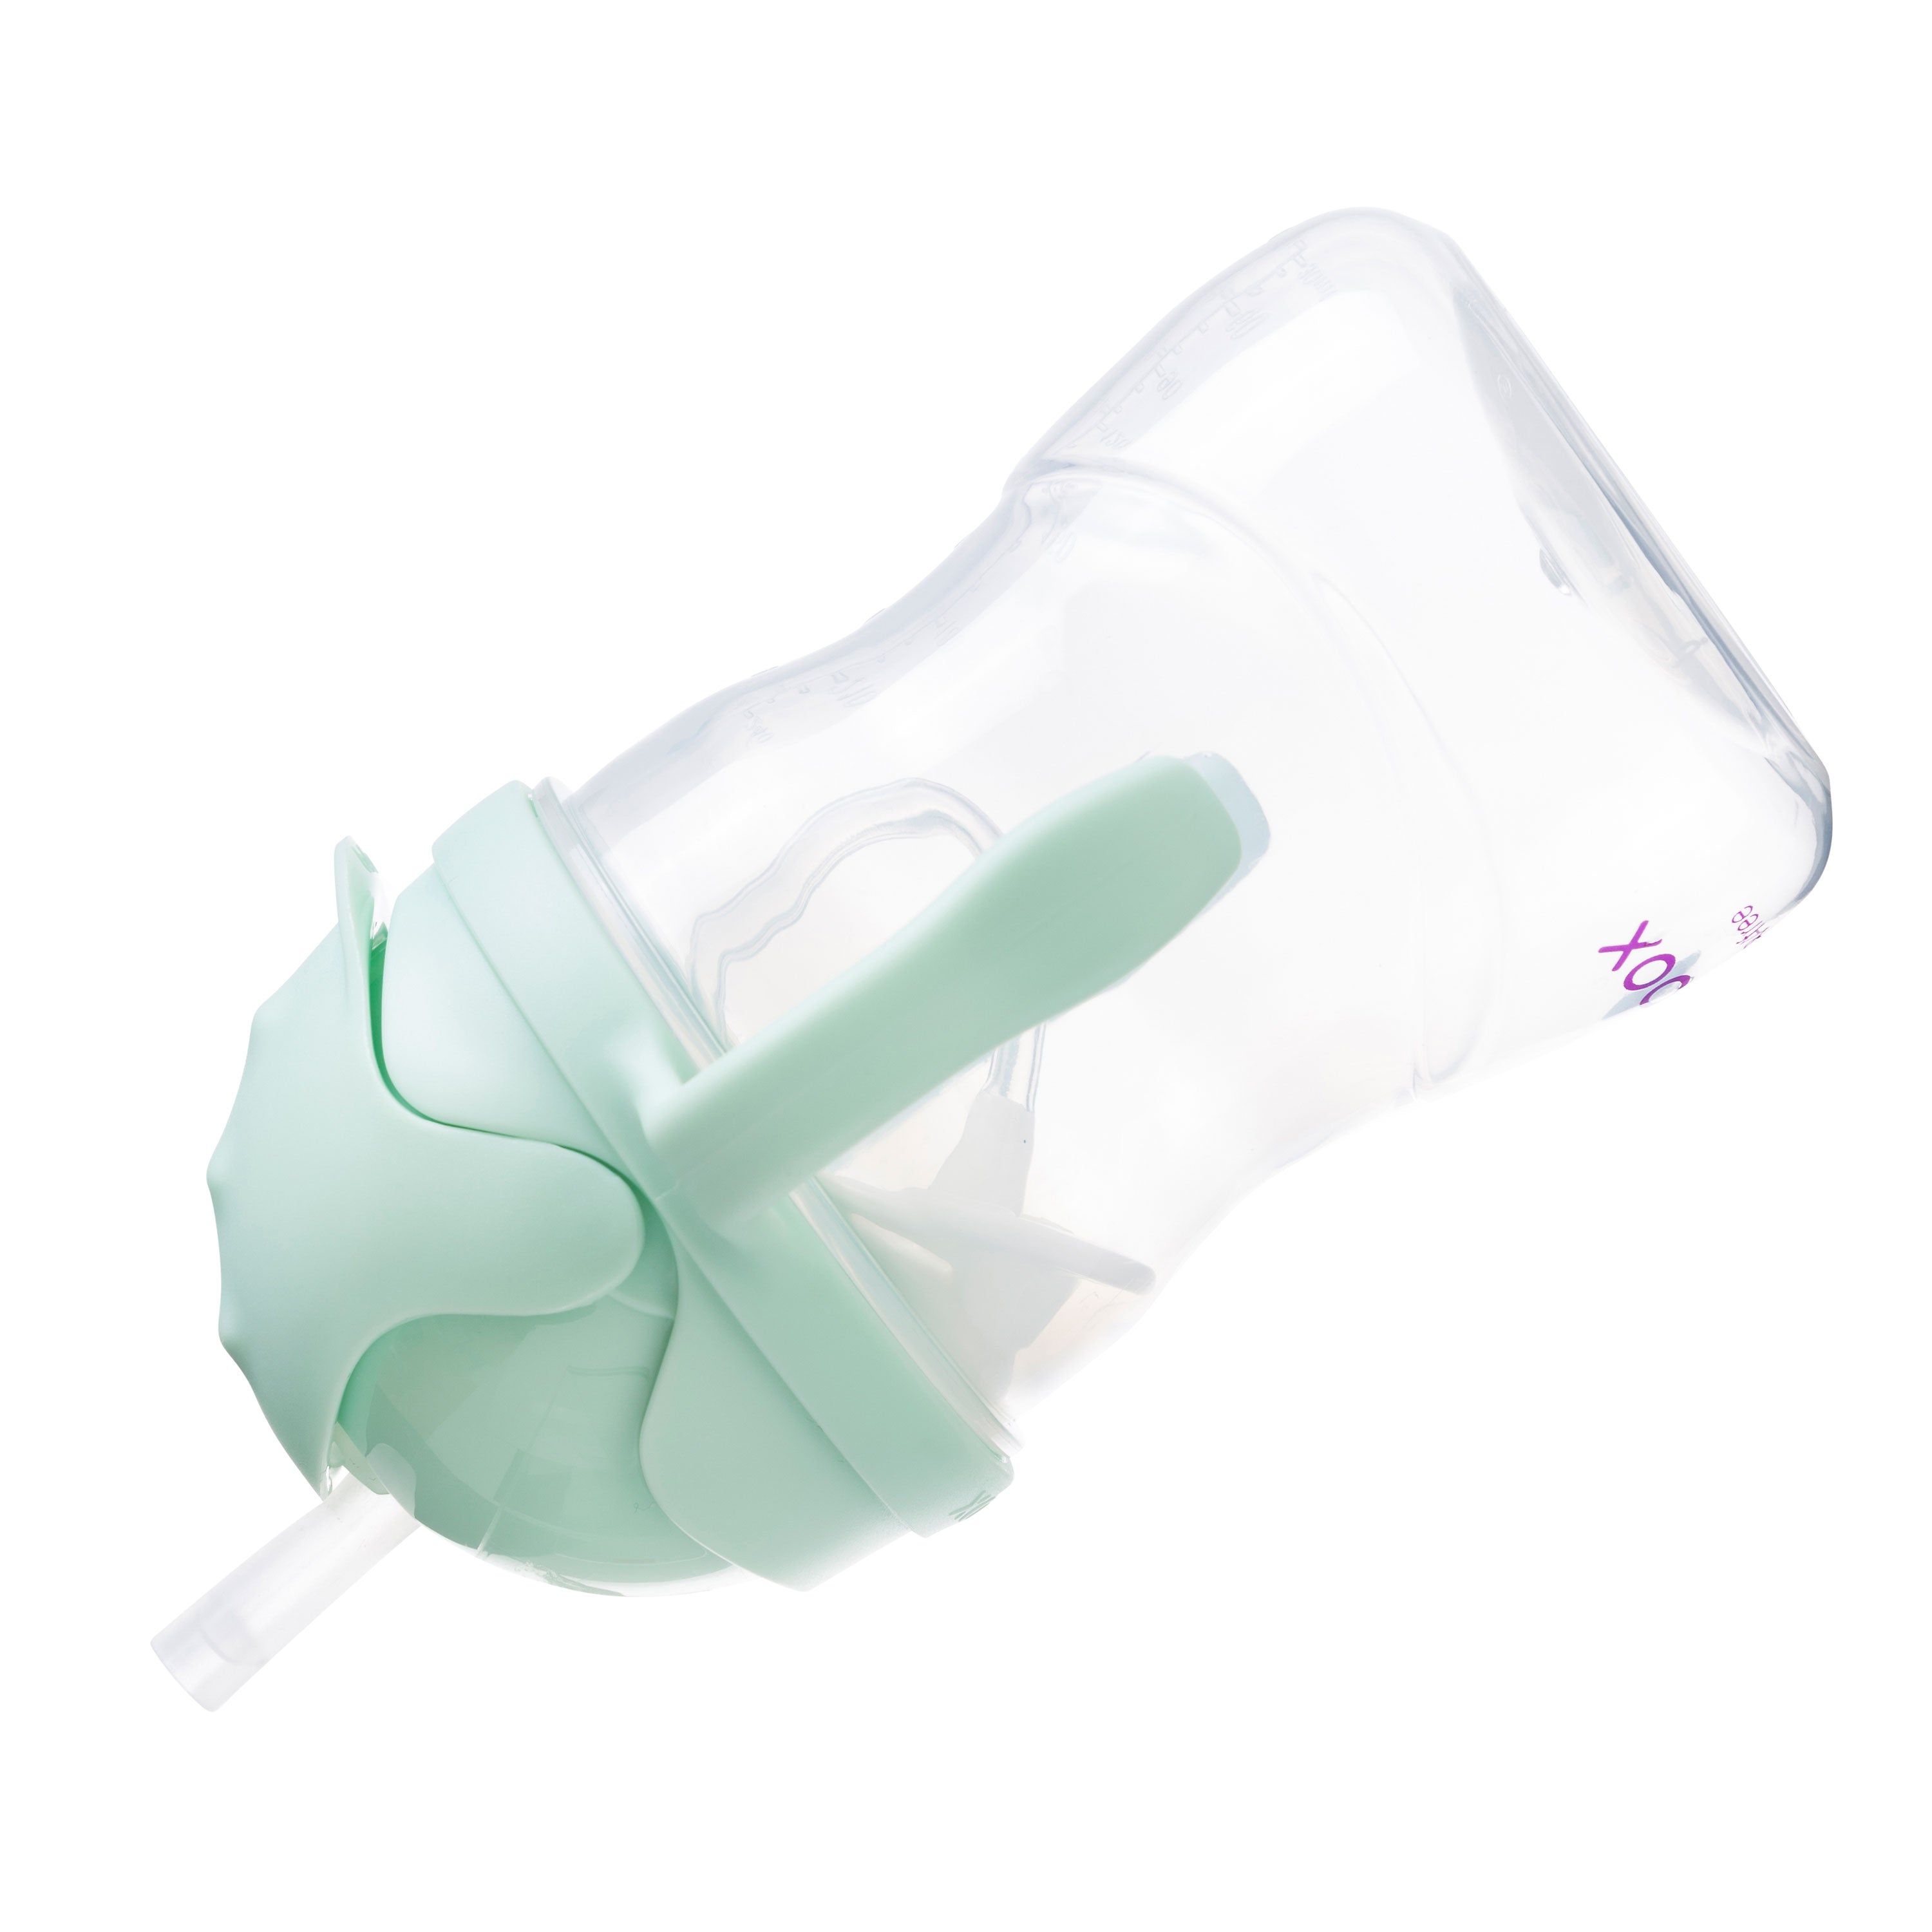 b.box Weighted Straw Sippy Cup 240ml - Pistachio Light Green